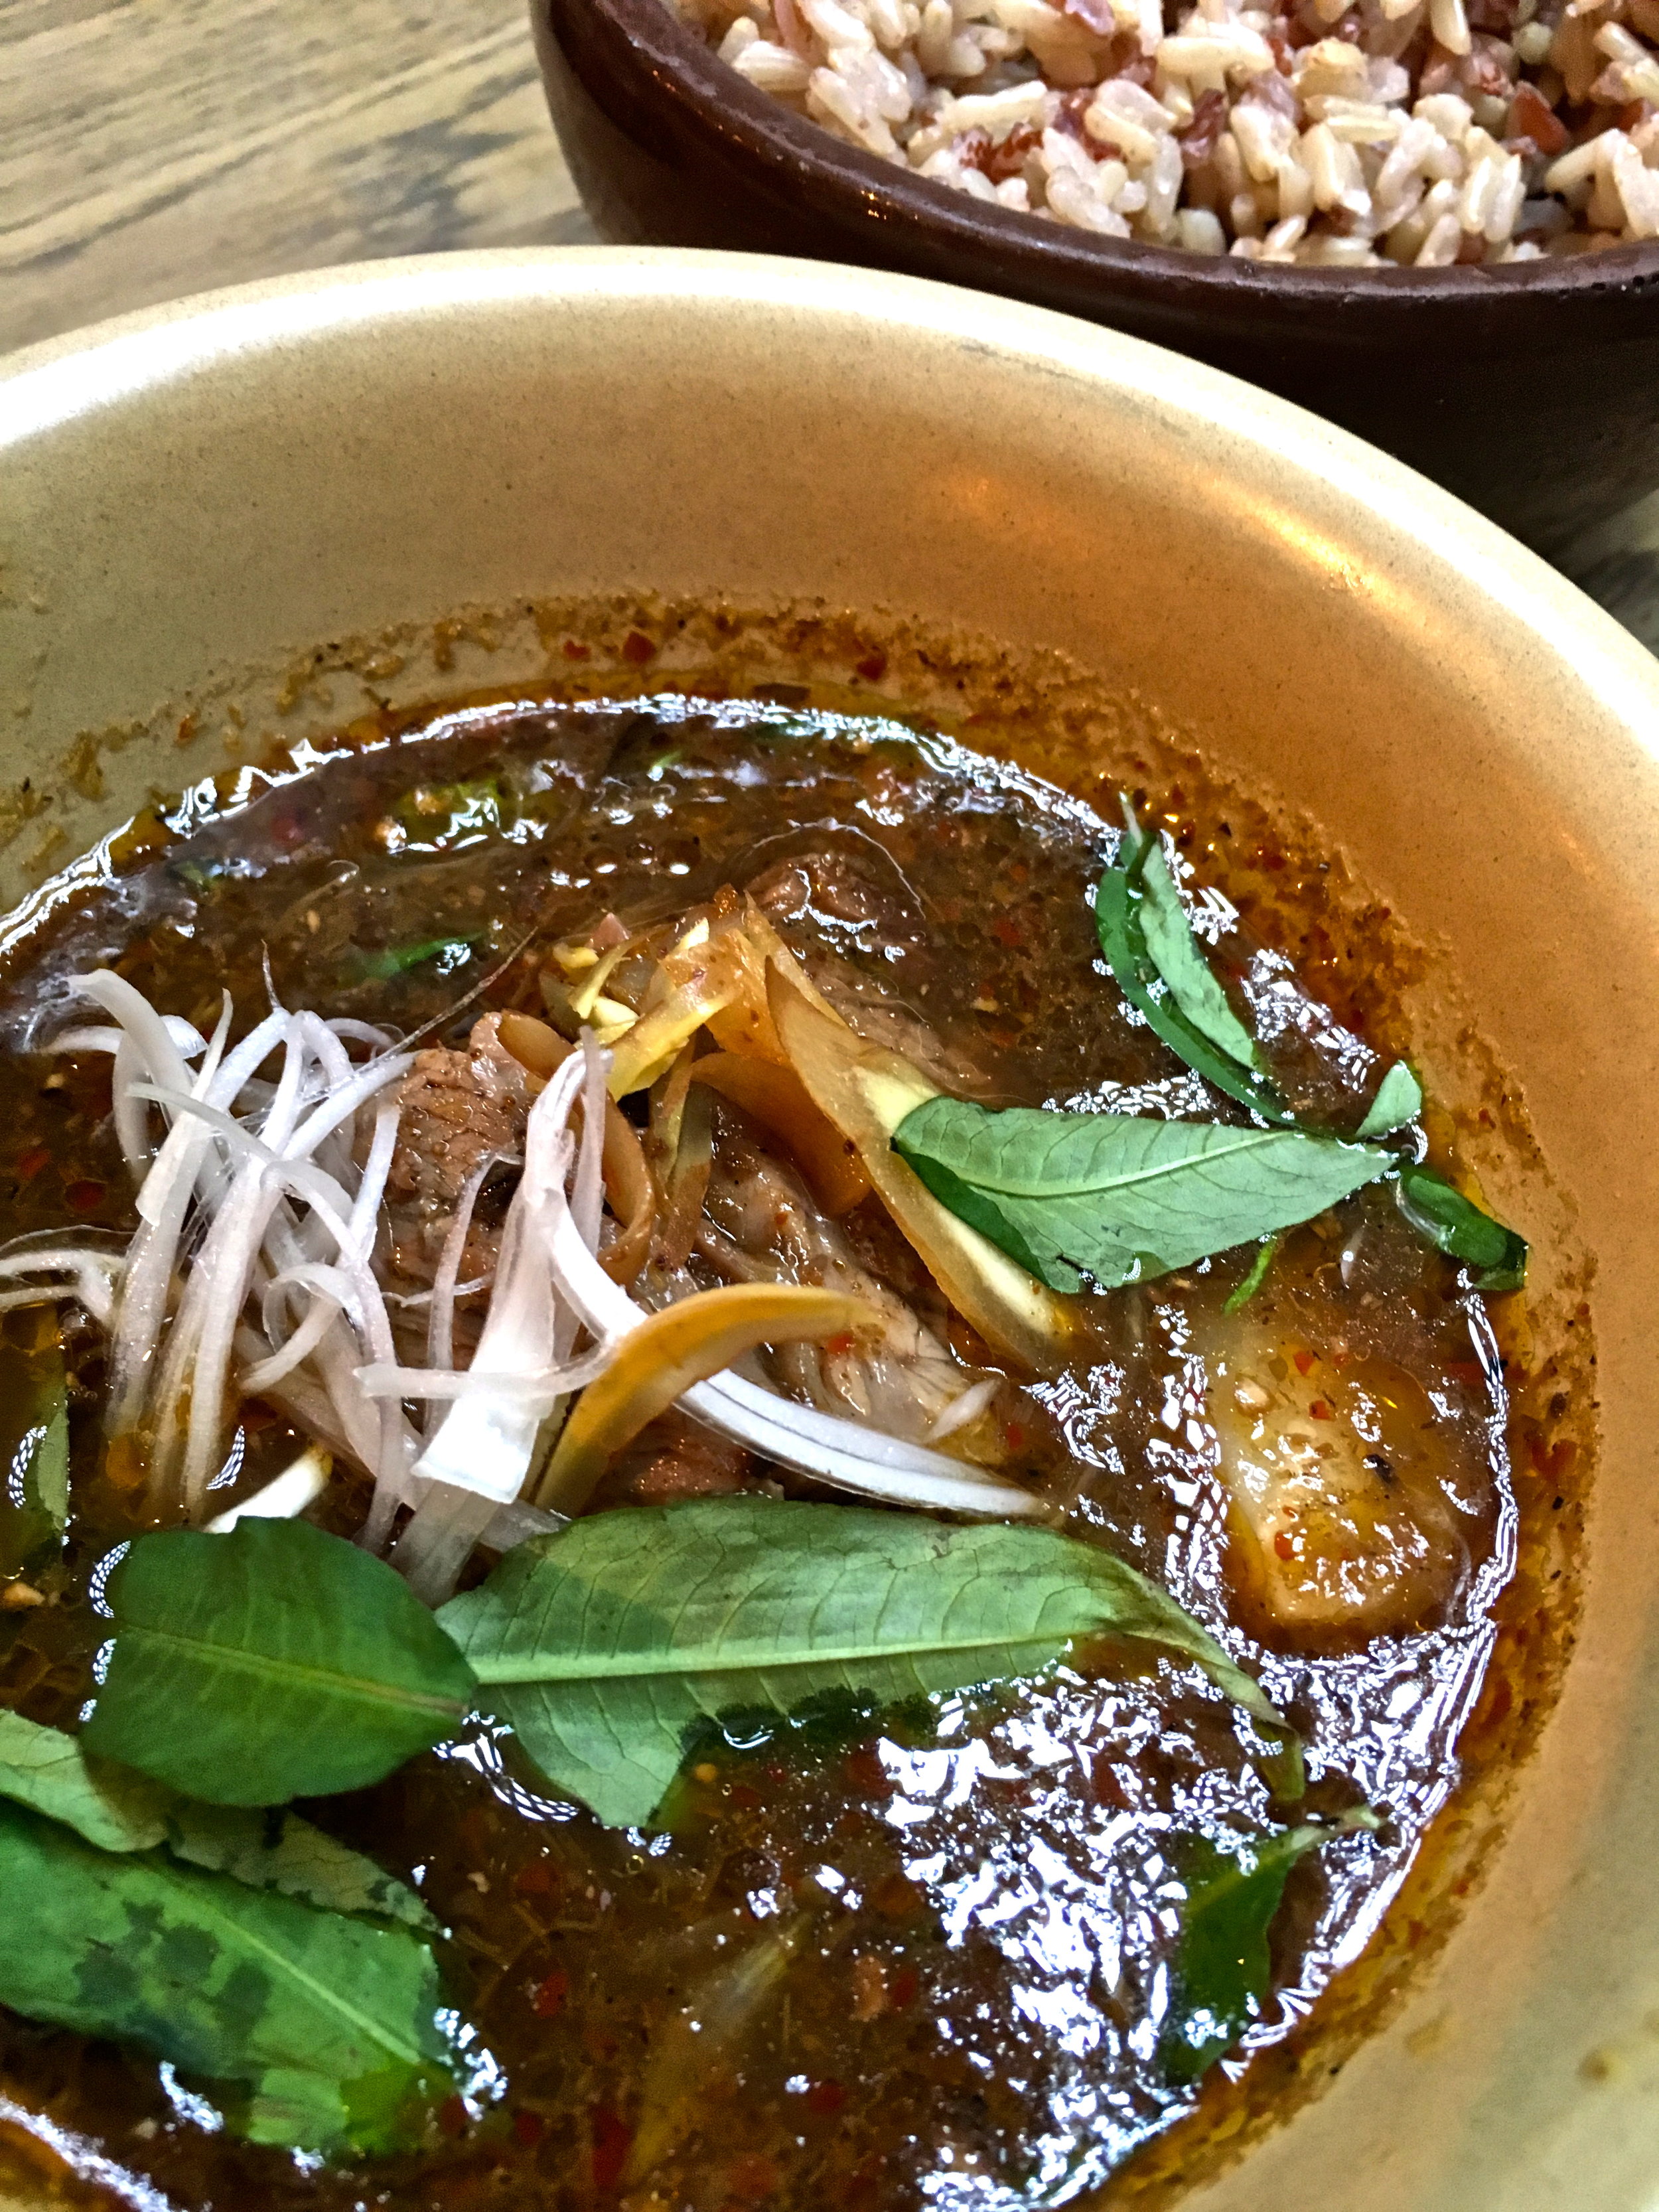 Wild Ginger and Brisket Curry from Burma